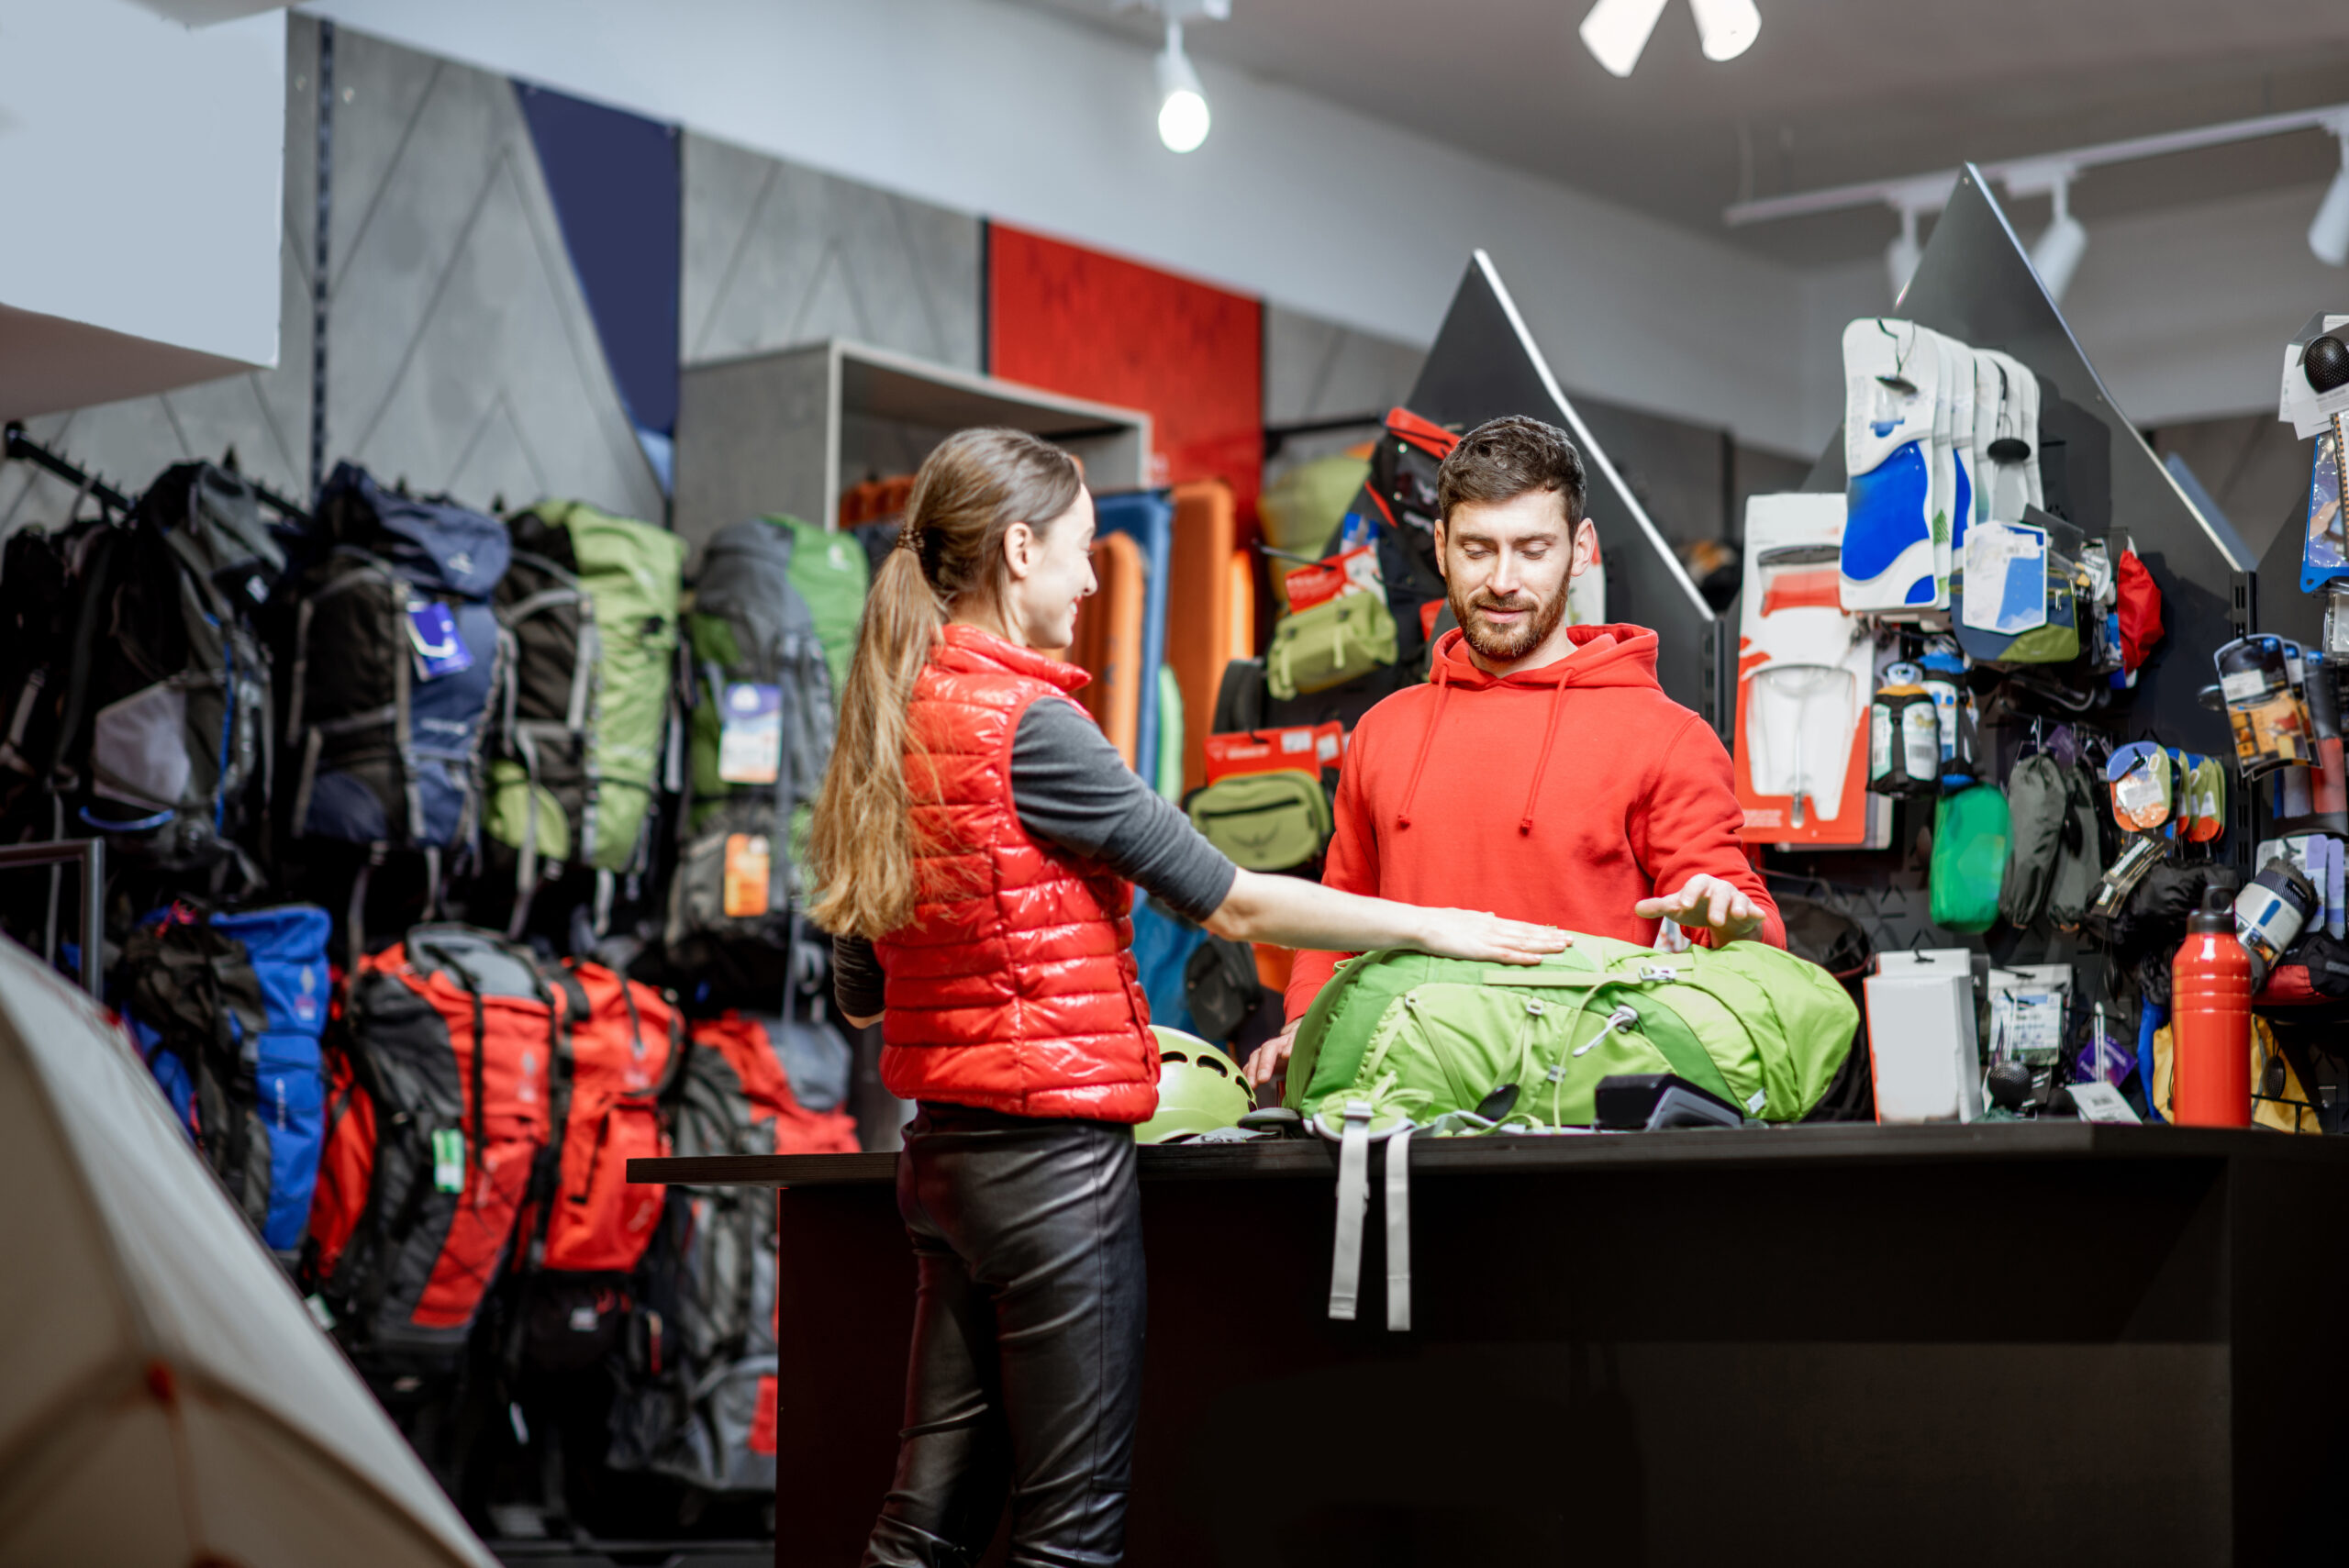 Trends shaping the sporting goods industry